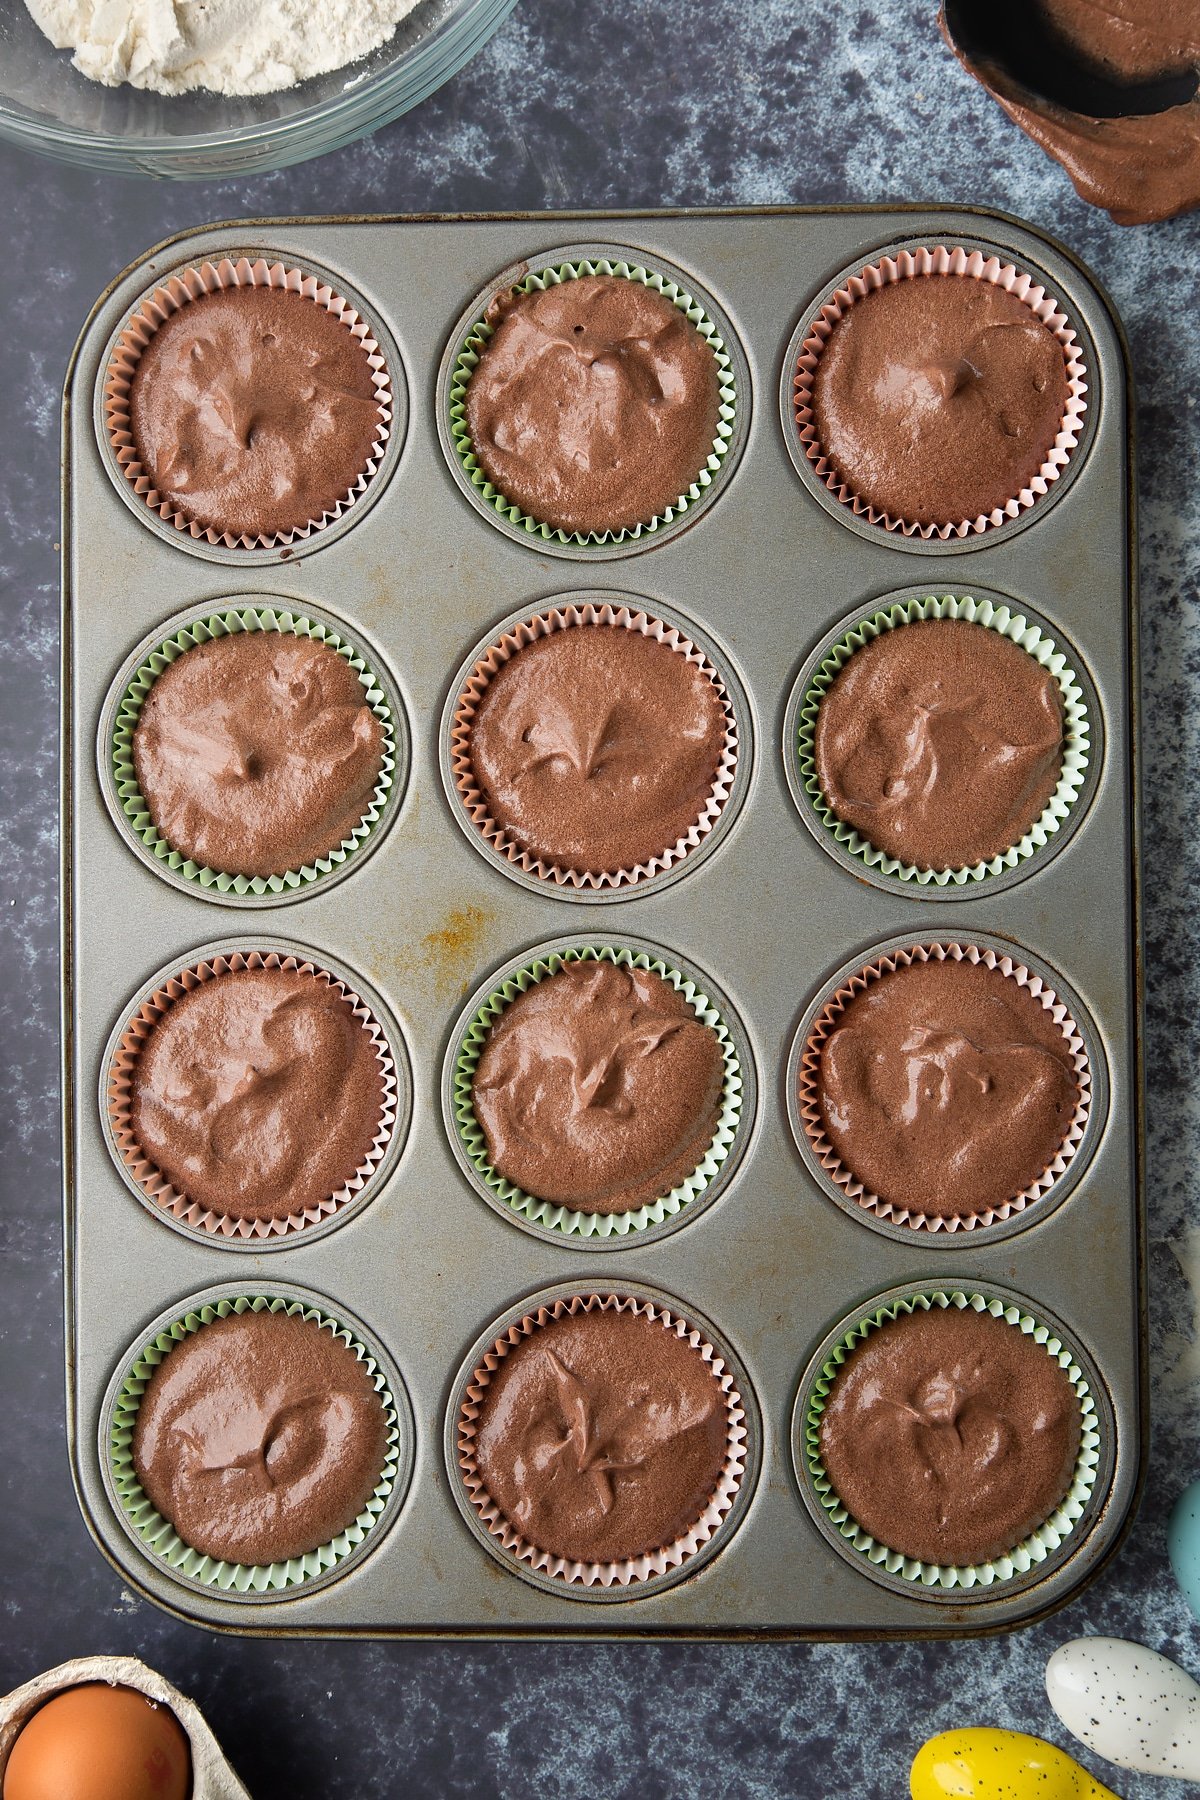 Chocolate cupcake batter in a 12-hole muffin tray. Ingredients to make slime cupcakes surround the tray.